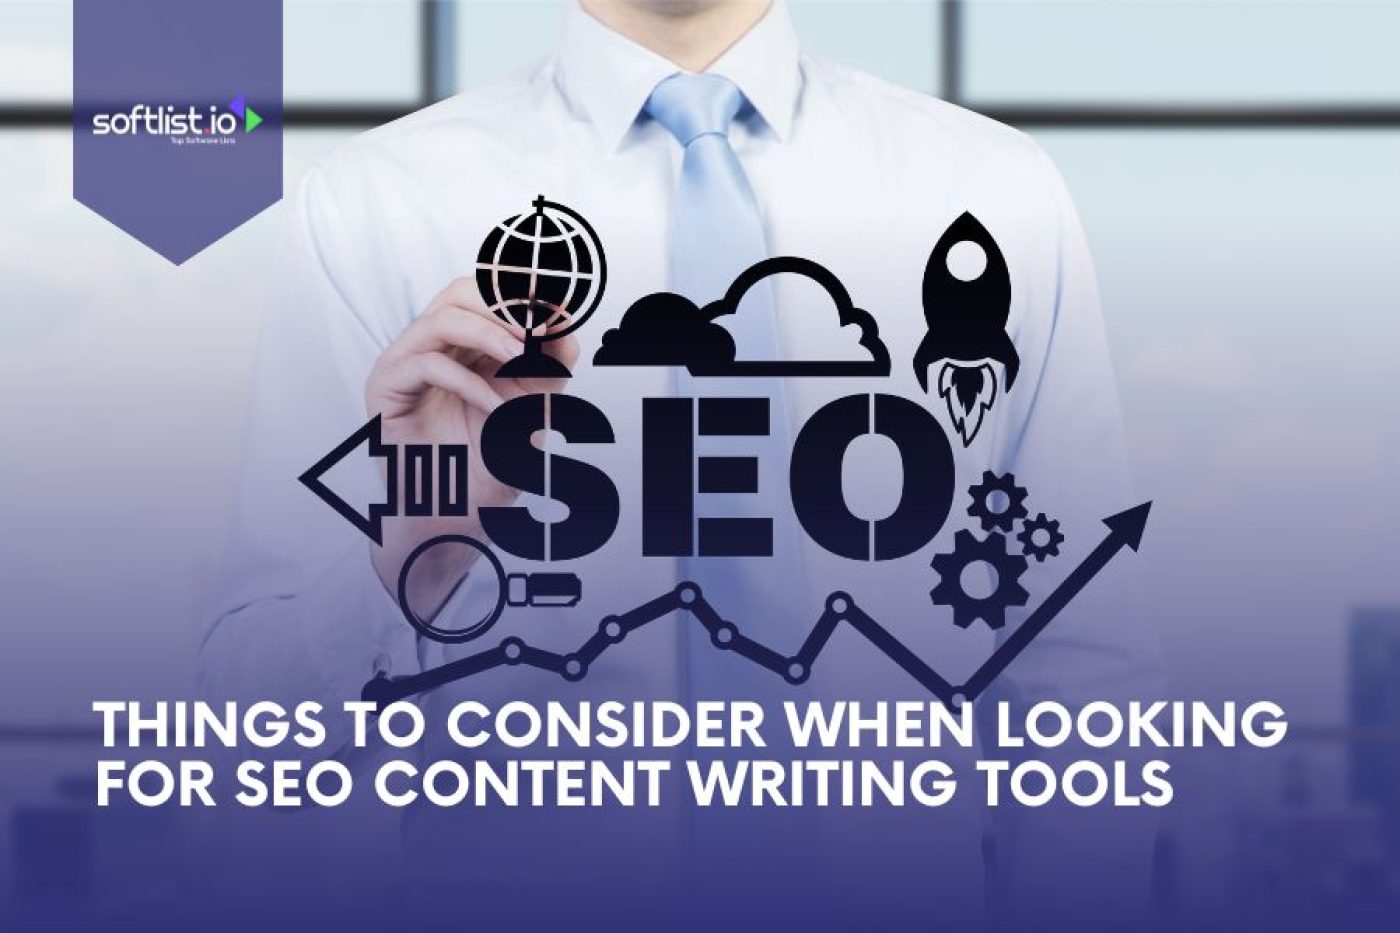 Things to Consider When Looking For SEO Content Writing Tools